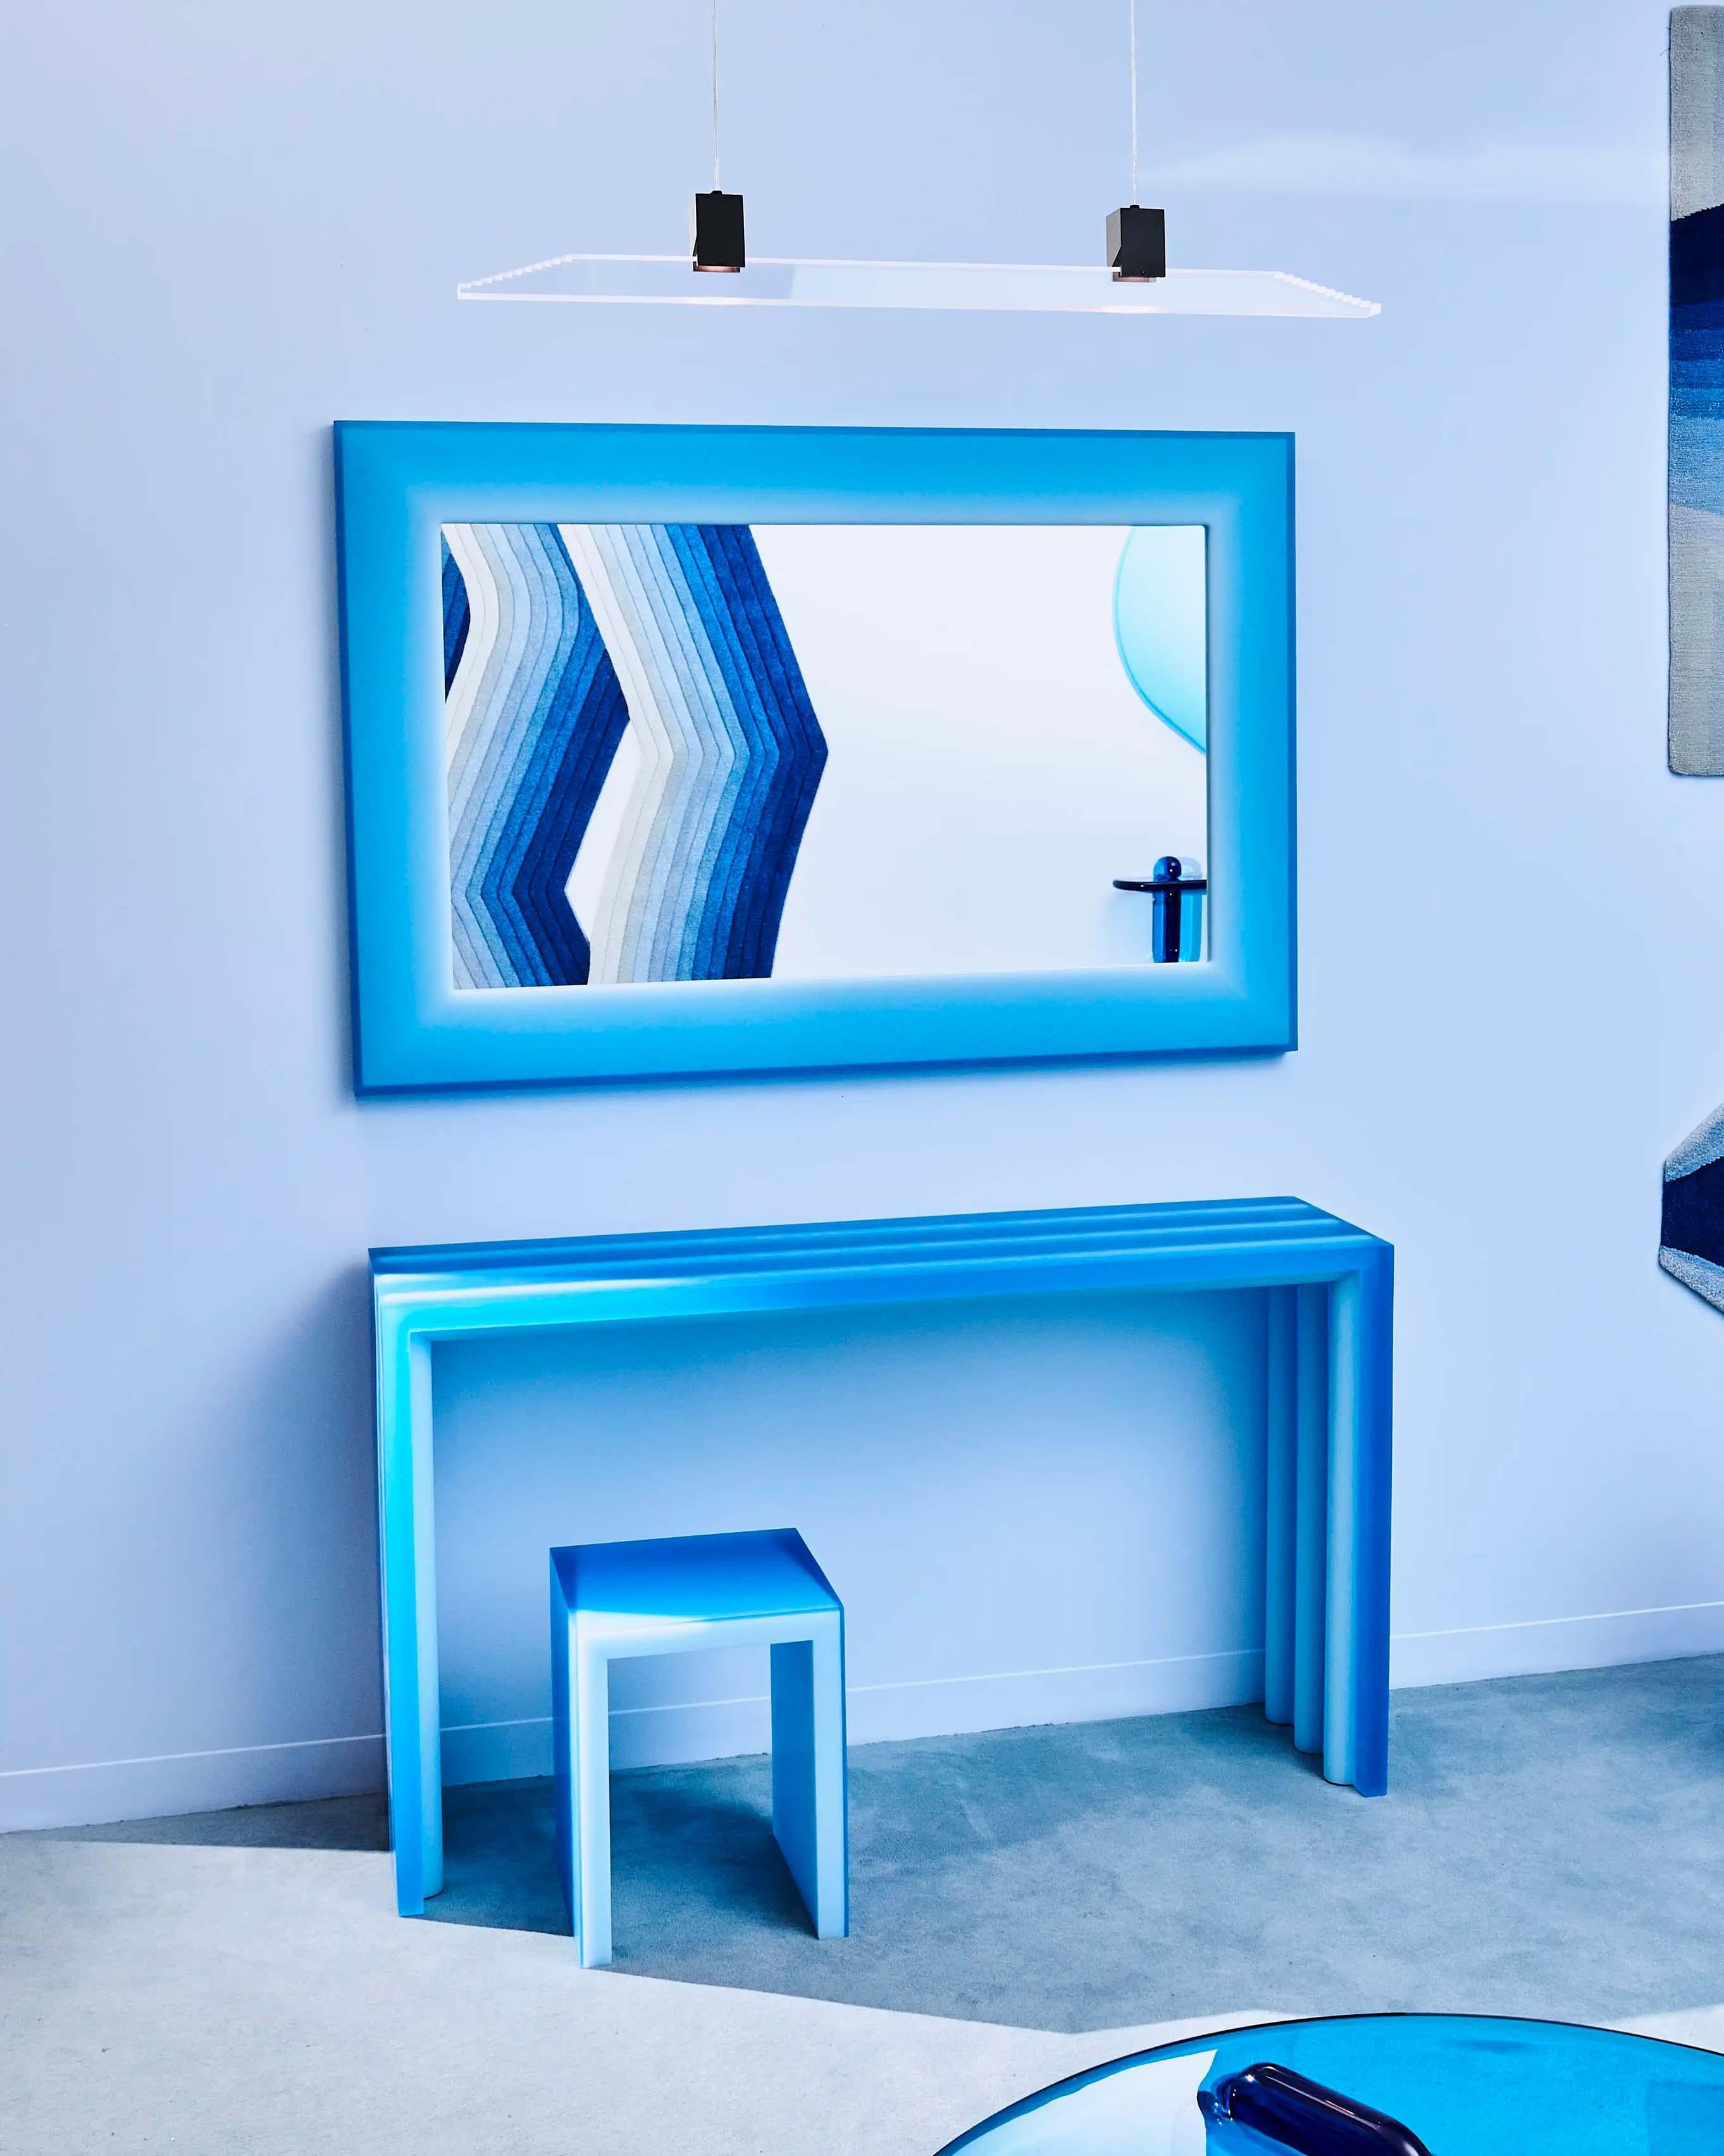 Unique wall mirror with a resin sculpted frame to create a smooth and luminous sky-liked surface. The technique creates an illusion of a glowing effect, featuring a subtle saturation shift on the blue spectrum by manipulating the visual interaction